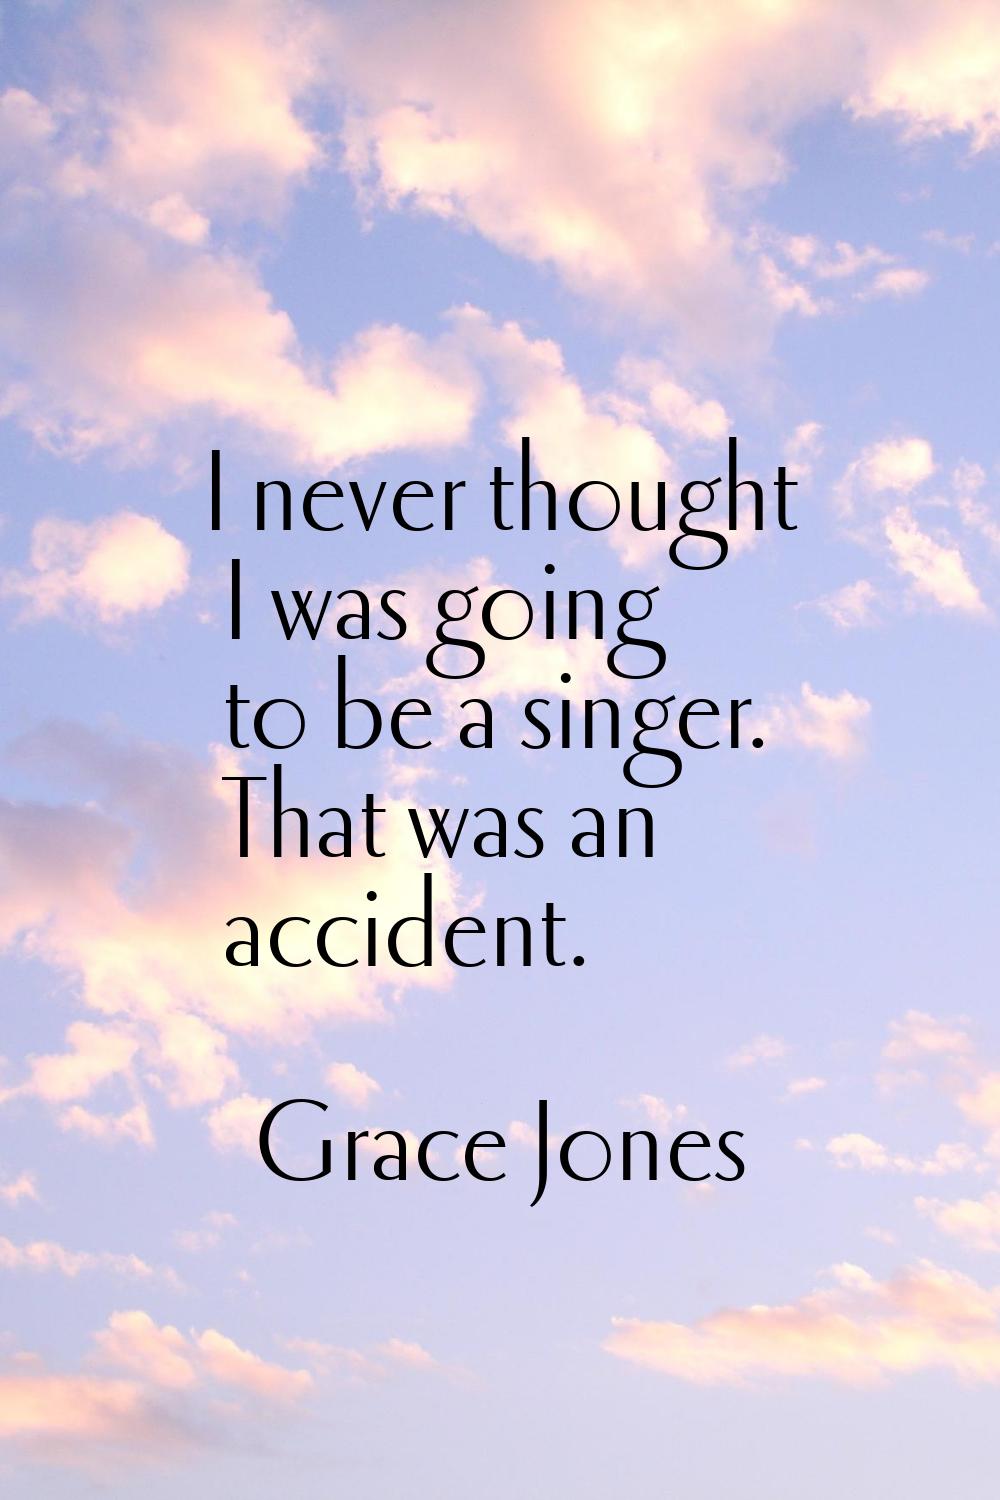 I never thought I was going to be a singer. That was an accident.